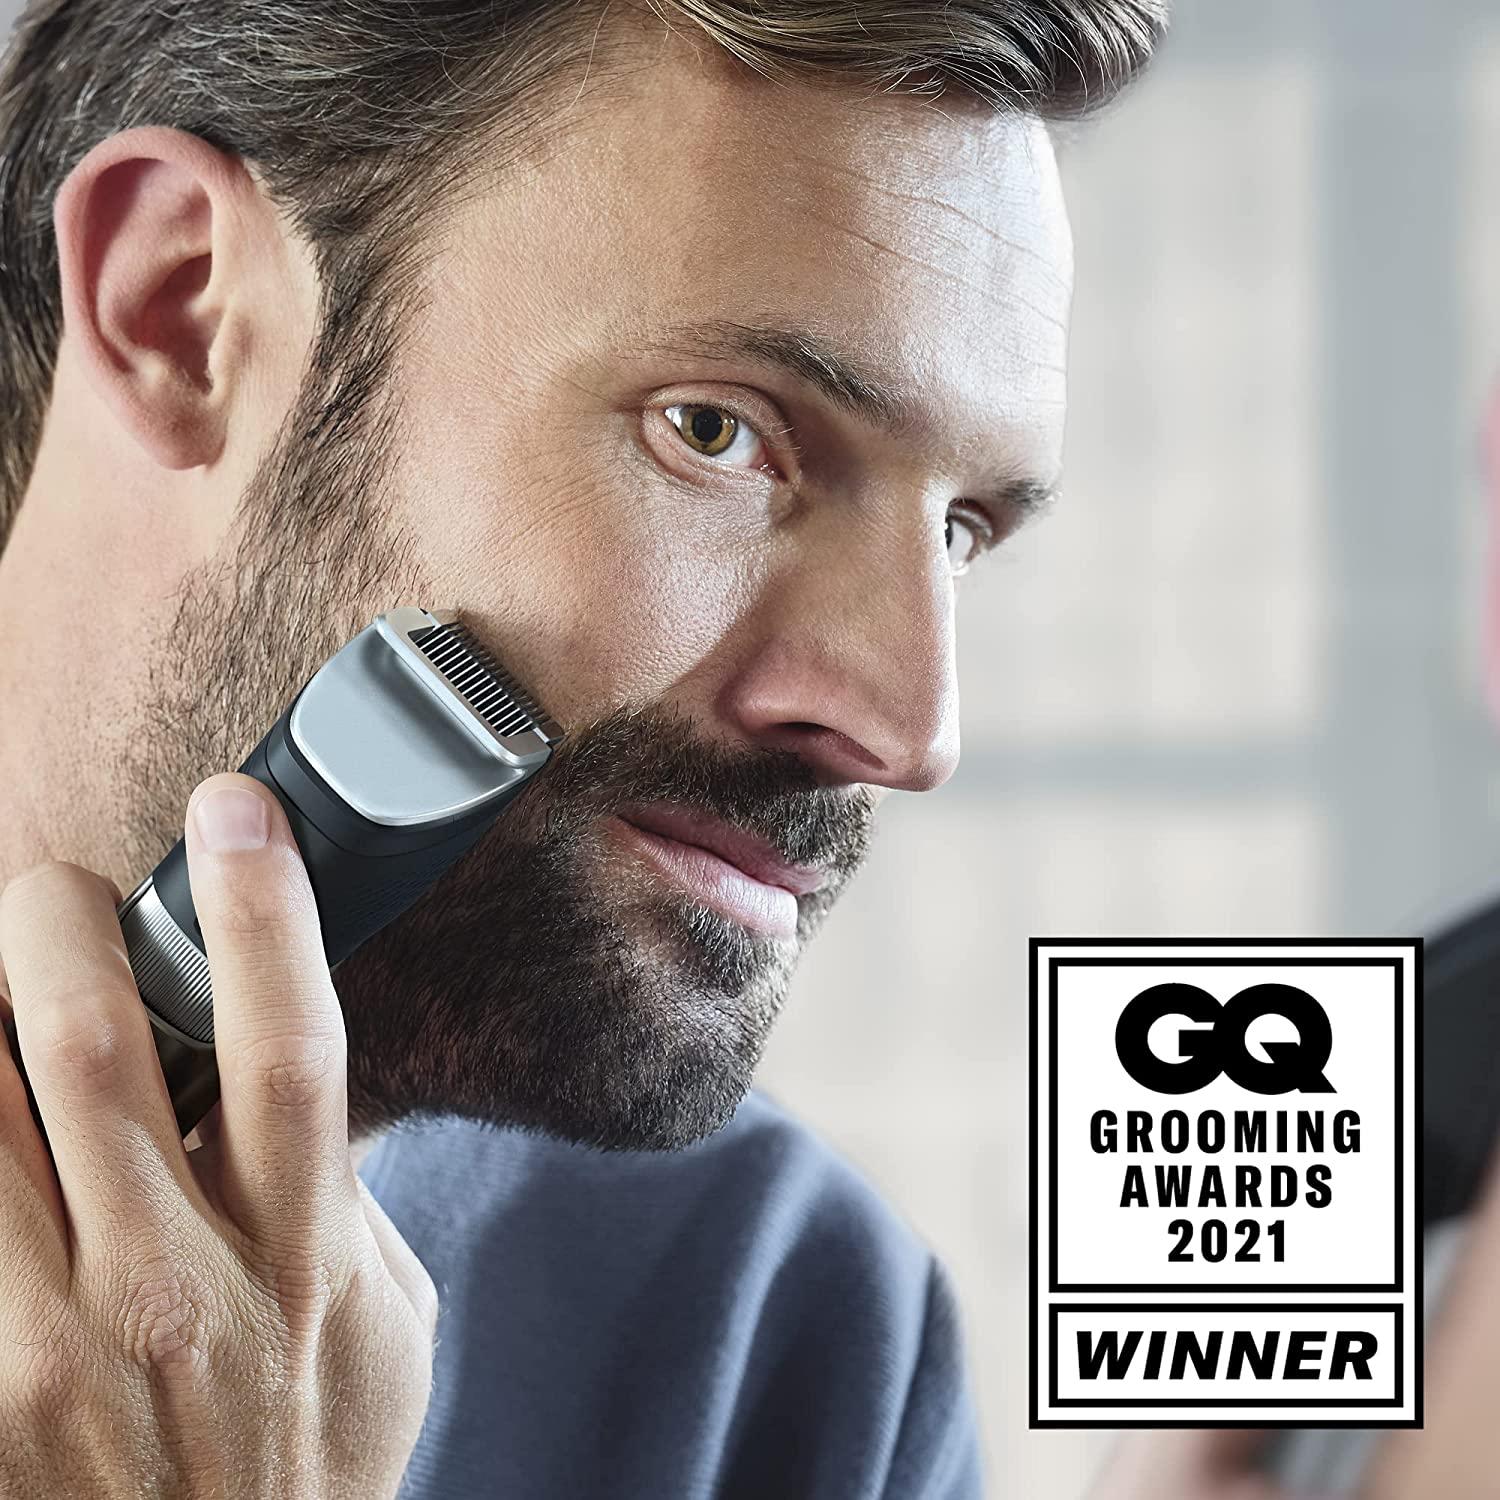 Forsendelse lommeregner 鍔 Philips Norelco Series 9000, Ultimate Precision Beard and Hair Trimmer with  Beard Sense Technology for an Even Trim, BT9810/40